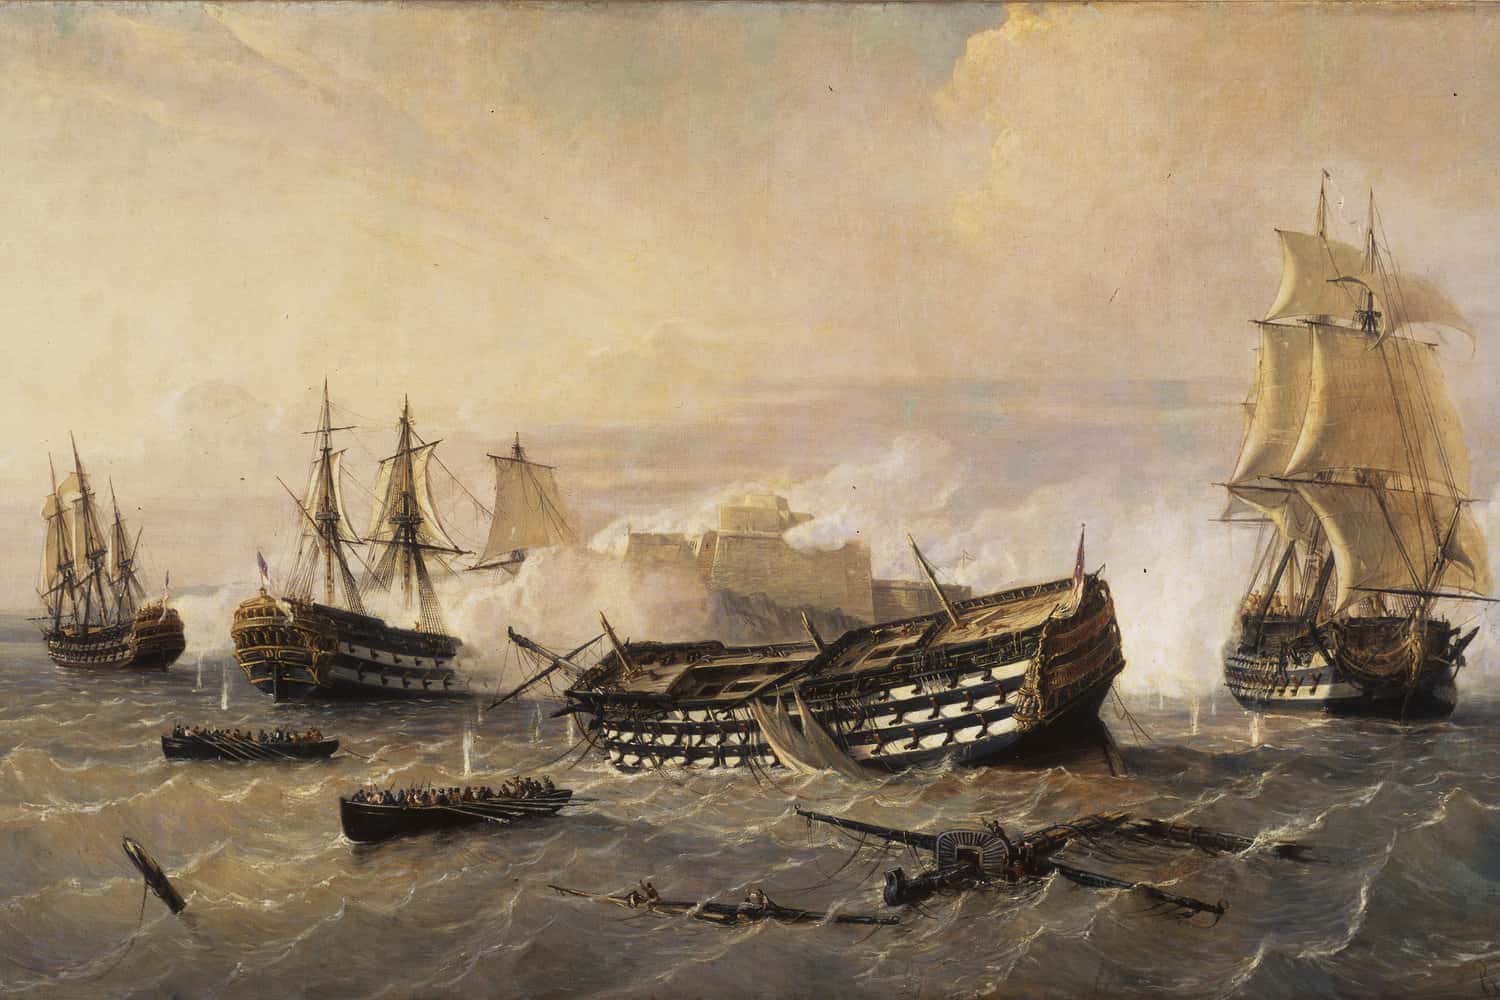 <p>Although Cook was to be granted his own vessel as part of the merchant navy, with the Seven Years<em class="Highlight"> War </em>looming, he enlisted as a volunteer serviceman for the Royal Navy. During the <em class="Highlight">war</em>, he was able to rise to the rank of master and was in command of the HMS Pembroke in North America. The Pembroke carried out major campaigns including the successful sieges of the Fortress of Louisbourg and Quebec City.</p>  <p>It was during these campaigns that Cook first demonstrated his expert cartography skills. Cook’s mapping of the St. Lawrence River was a decisive factor in the British winning the Battle of the Plains of Abraham in 1759, a pivotal moment in the<em class="Highlight"> war </em>and the development of the future nation of Canada.</p>